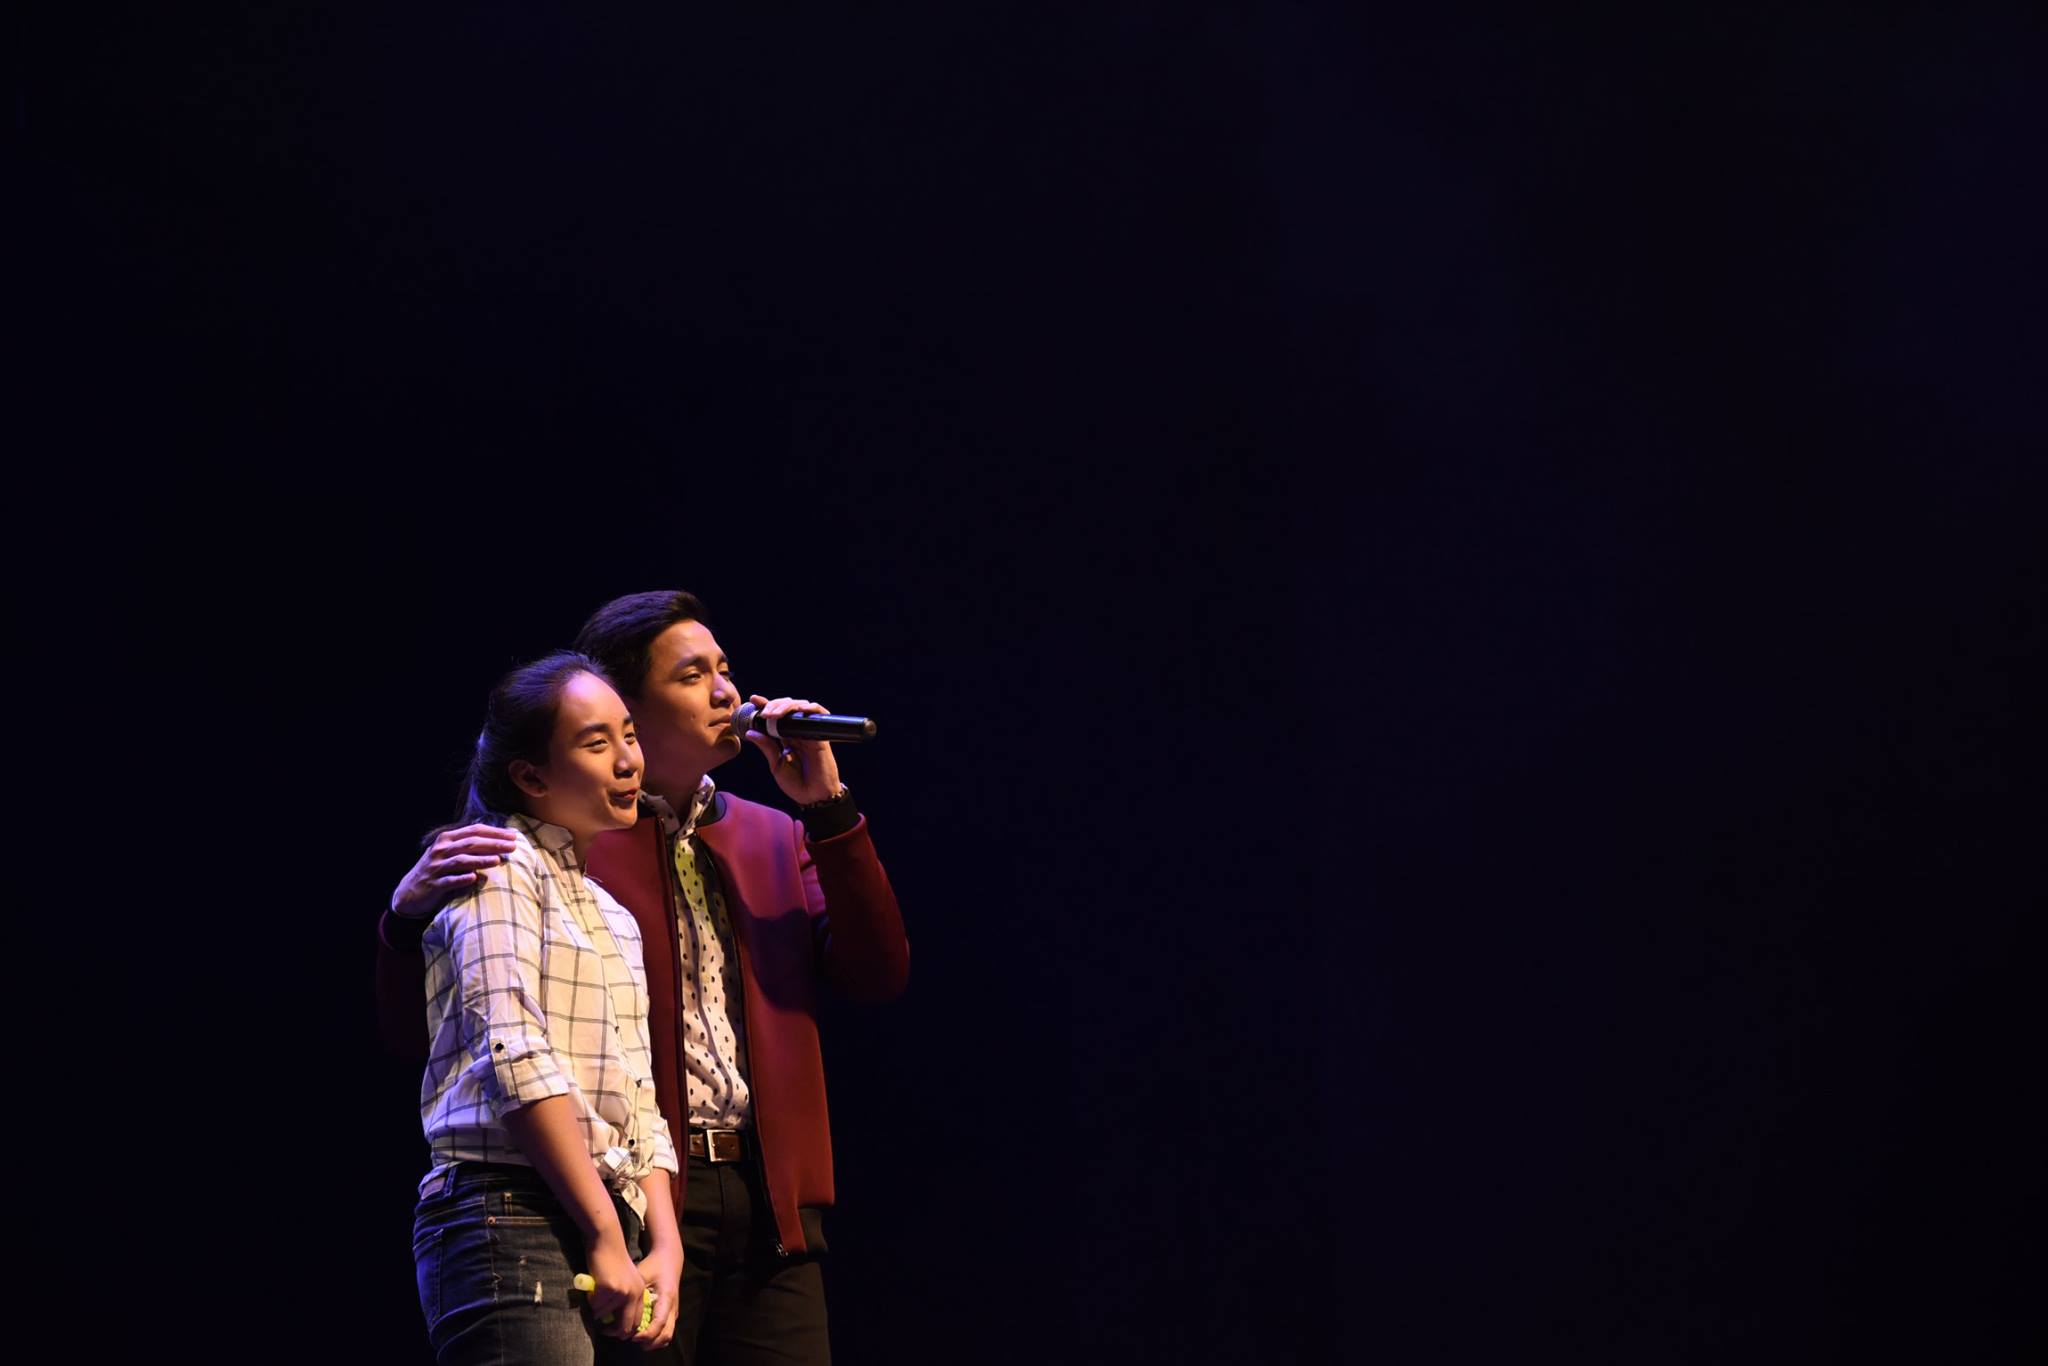 alden richards with a fan on stage serenade concert in singapore